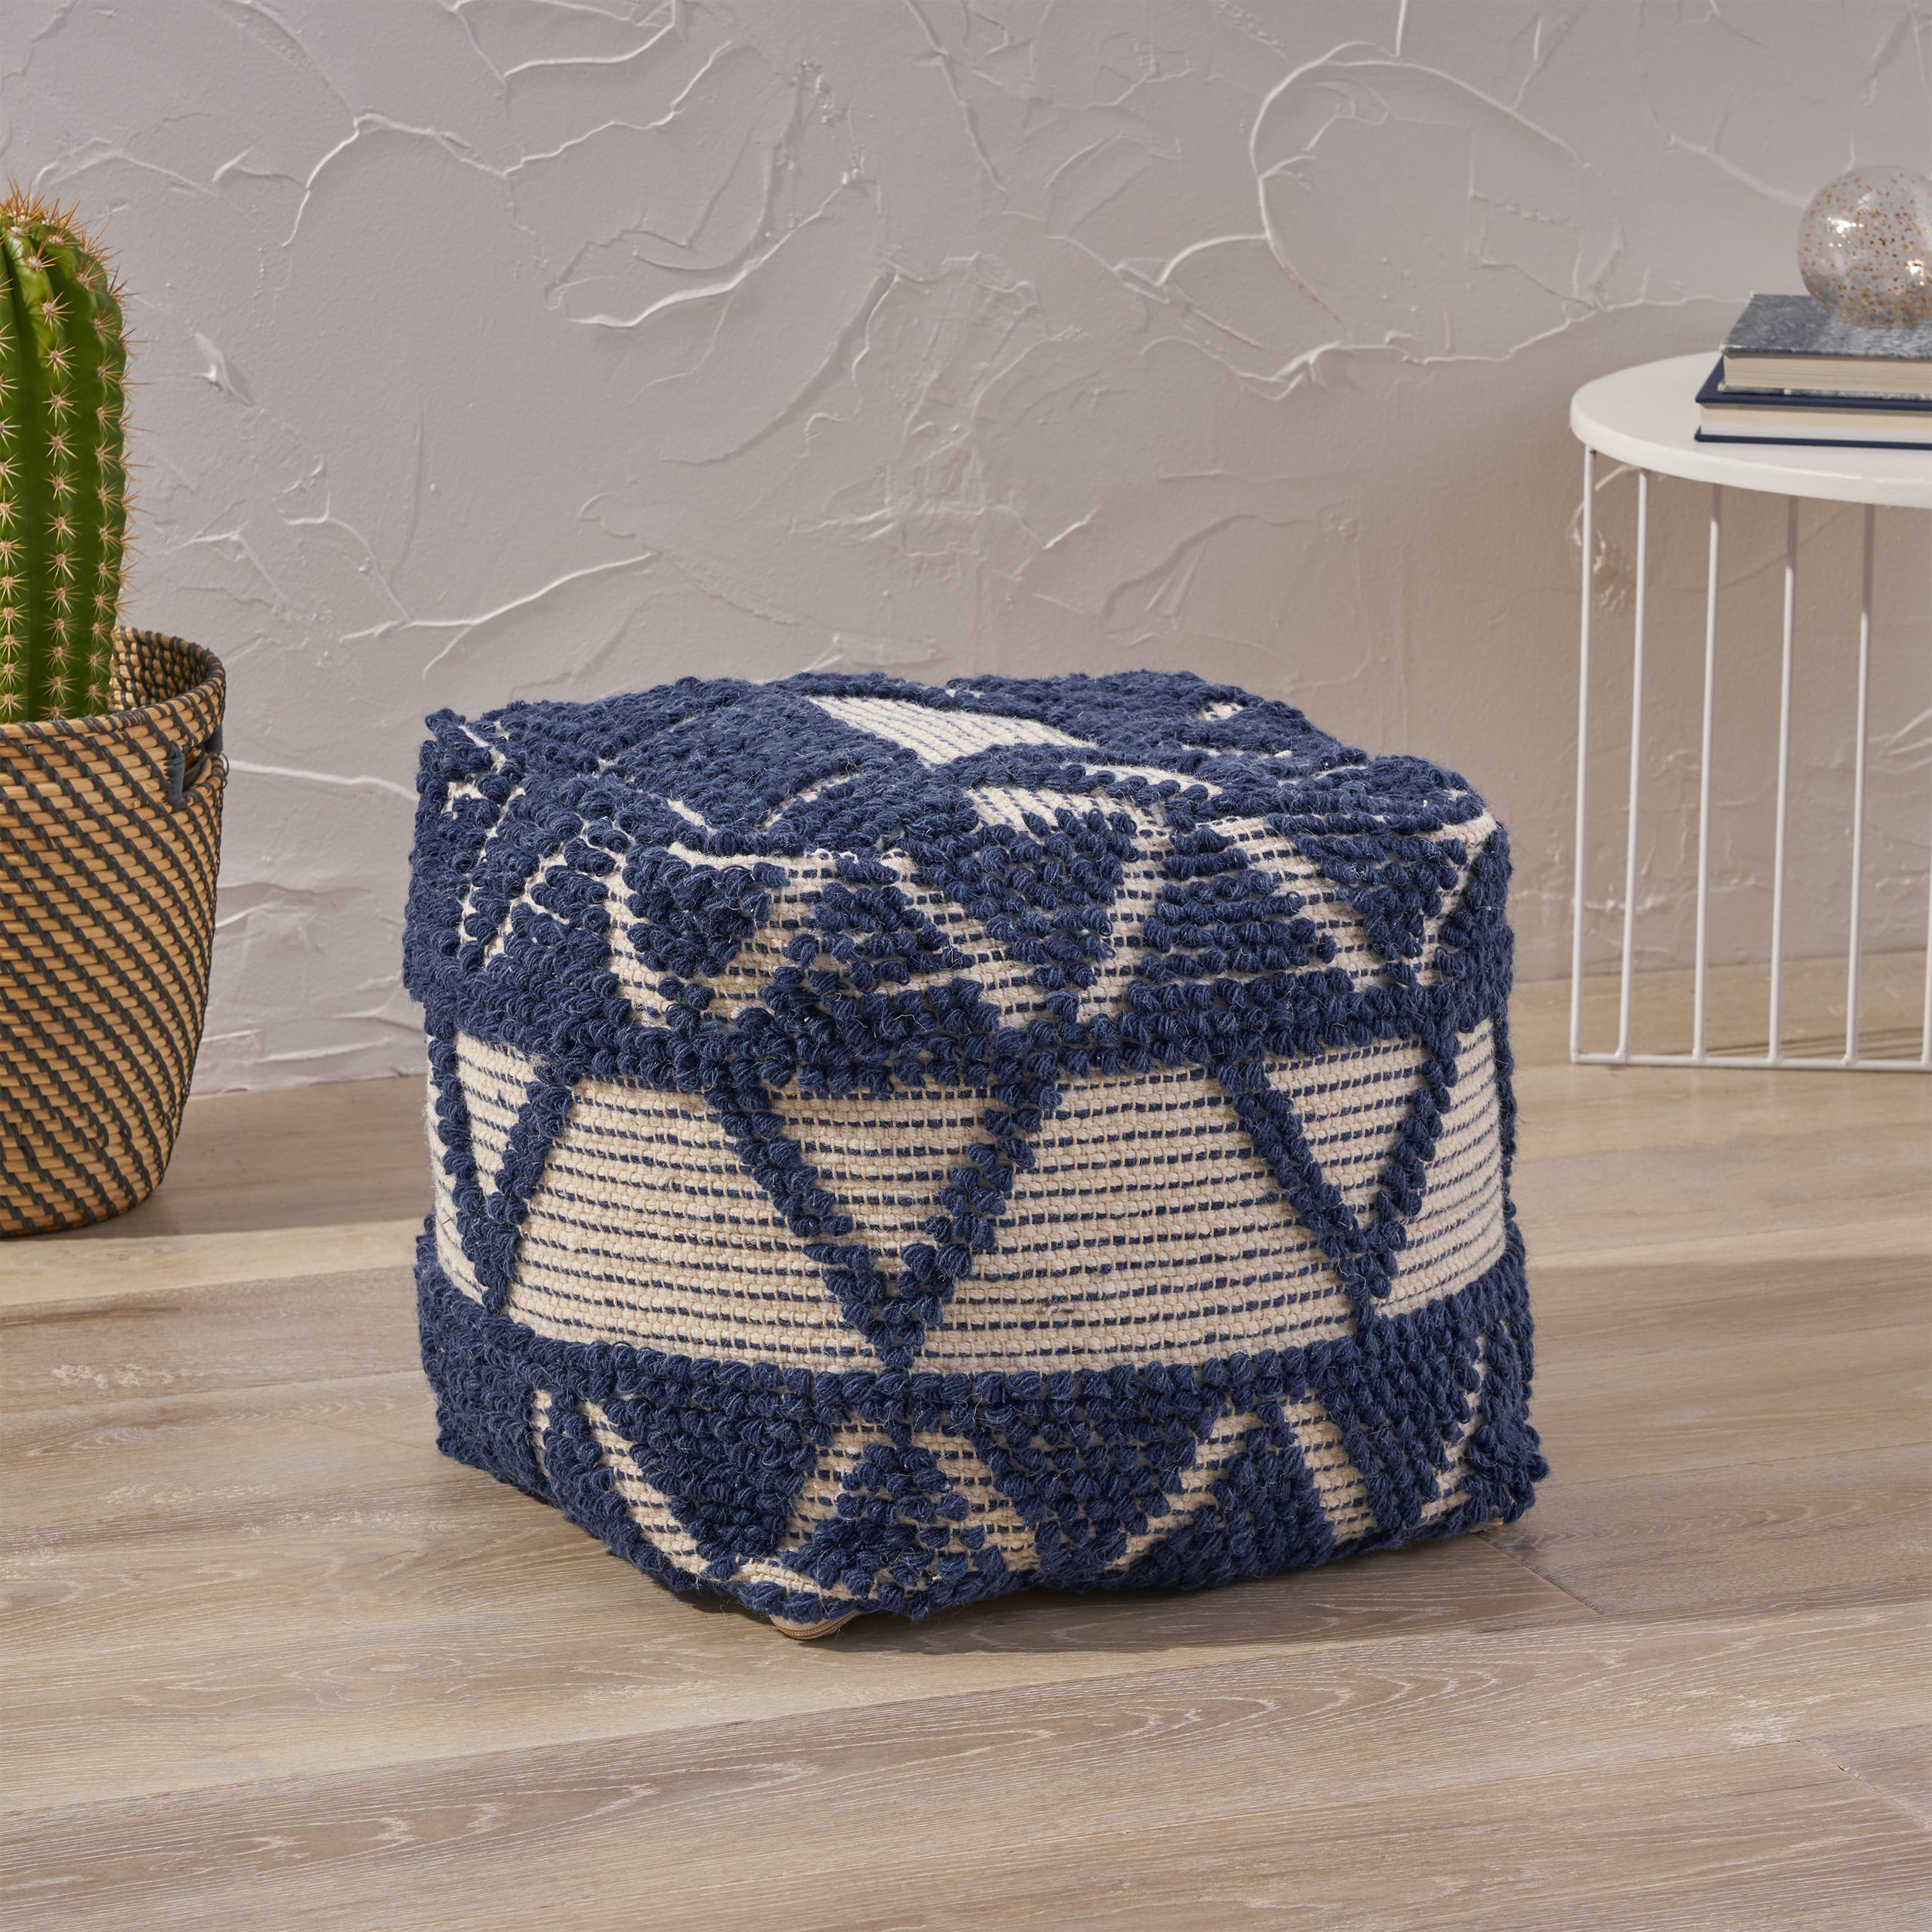 White Beni Ourain Pure Wool Foot Stool Buy 3 Get1 FREE Details about   Ottoman Pouf Seating